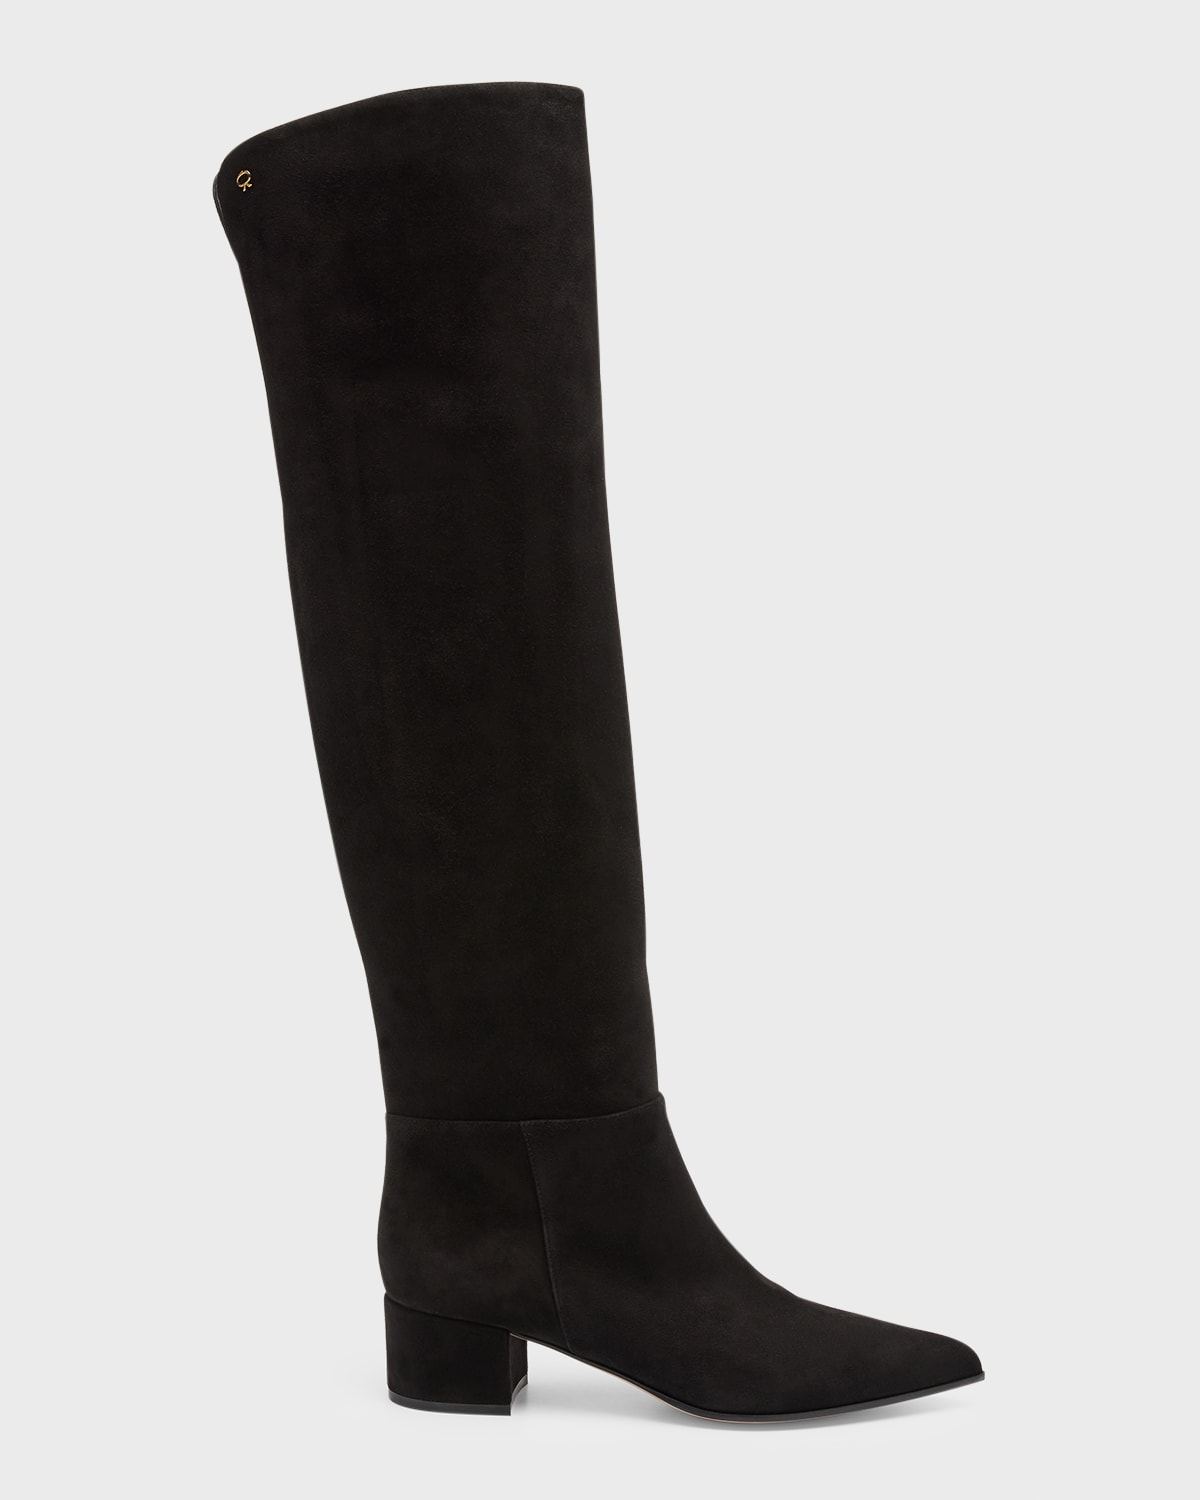 GIANVITO ROSSI SLOUCHY SUEDE OVER-THE-KNEE BOOTS